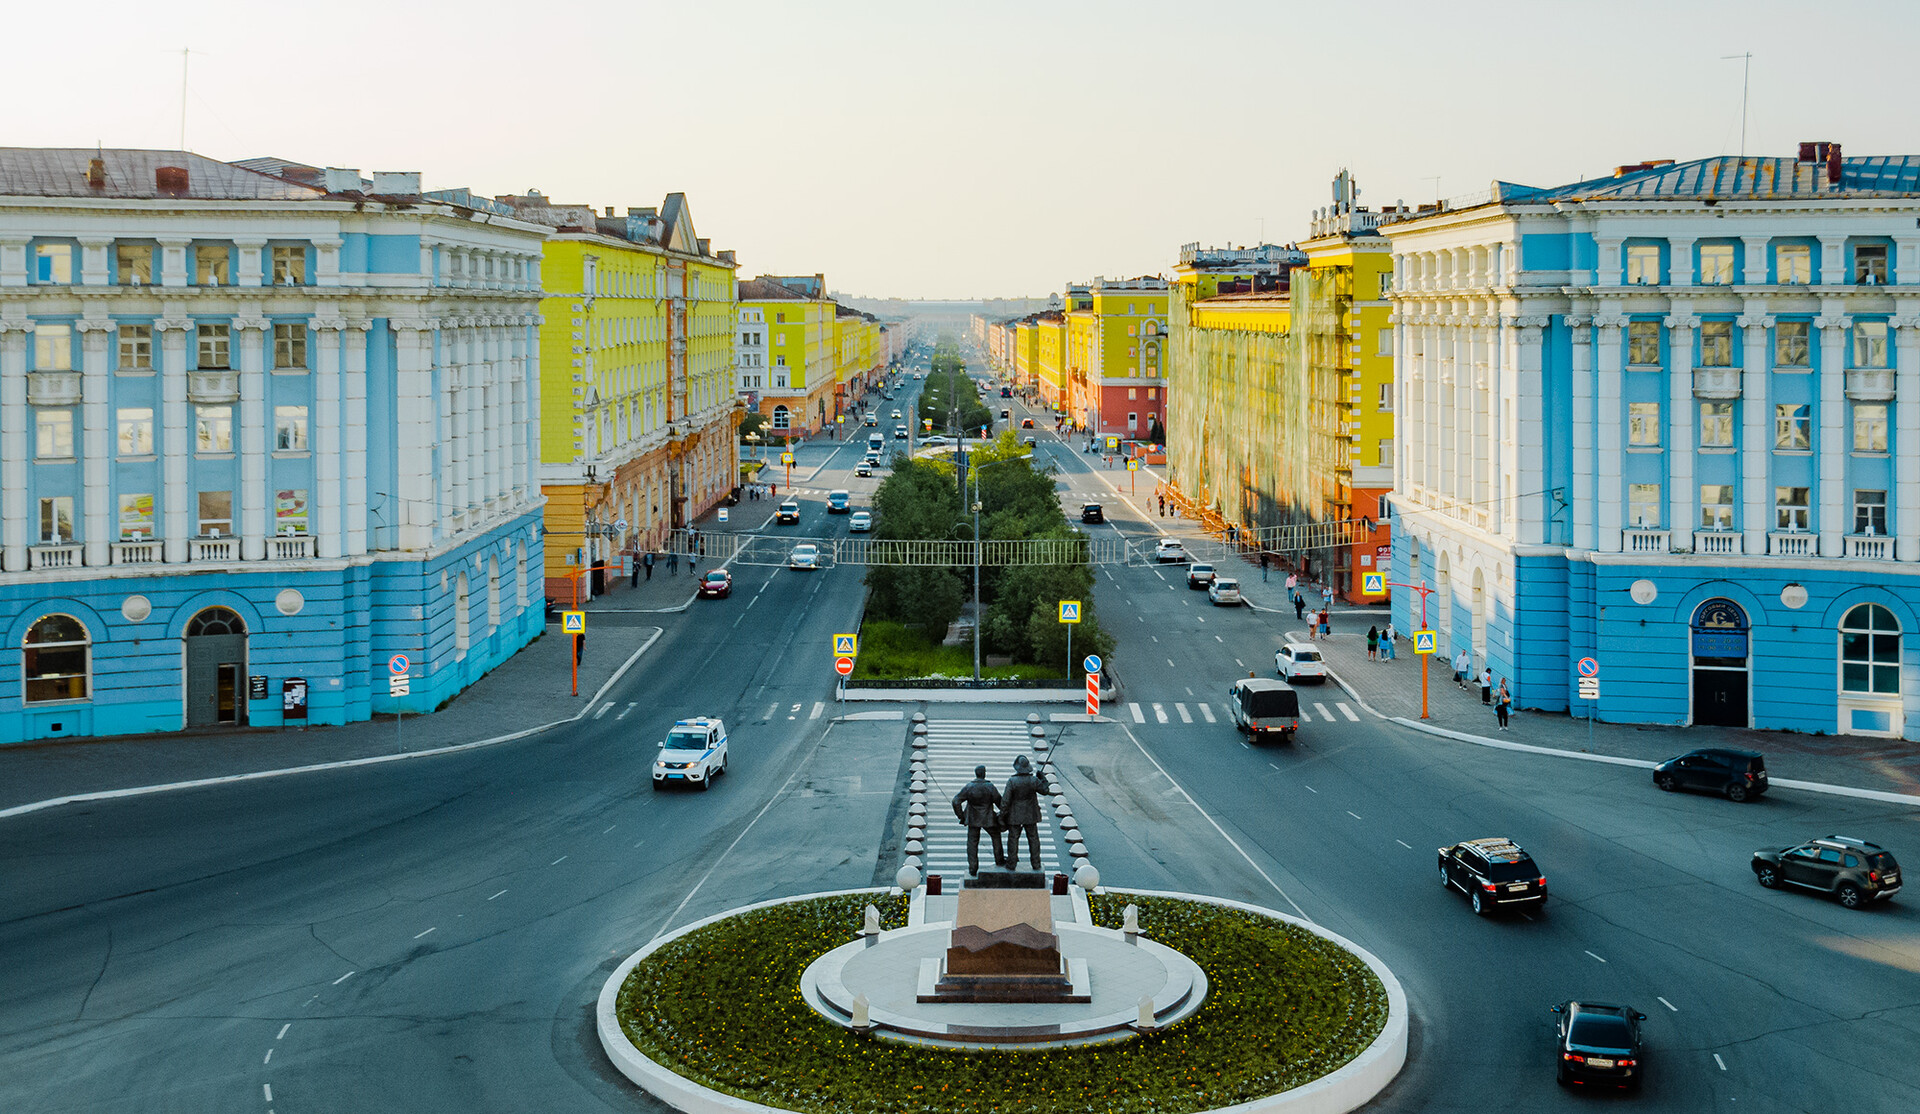 And this is the center of modern Norilsk, built in the style of St. Petersburg.